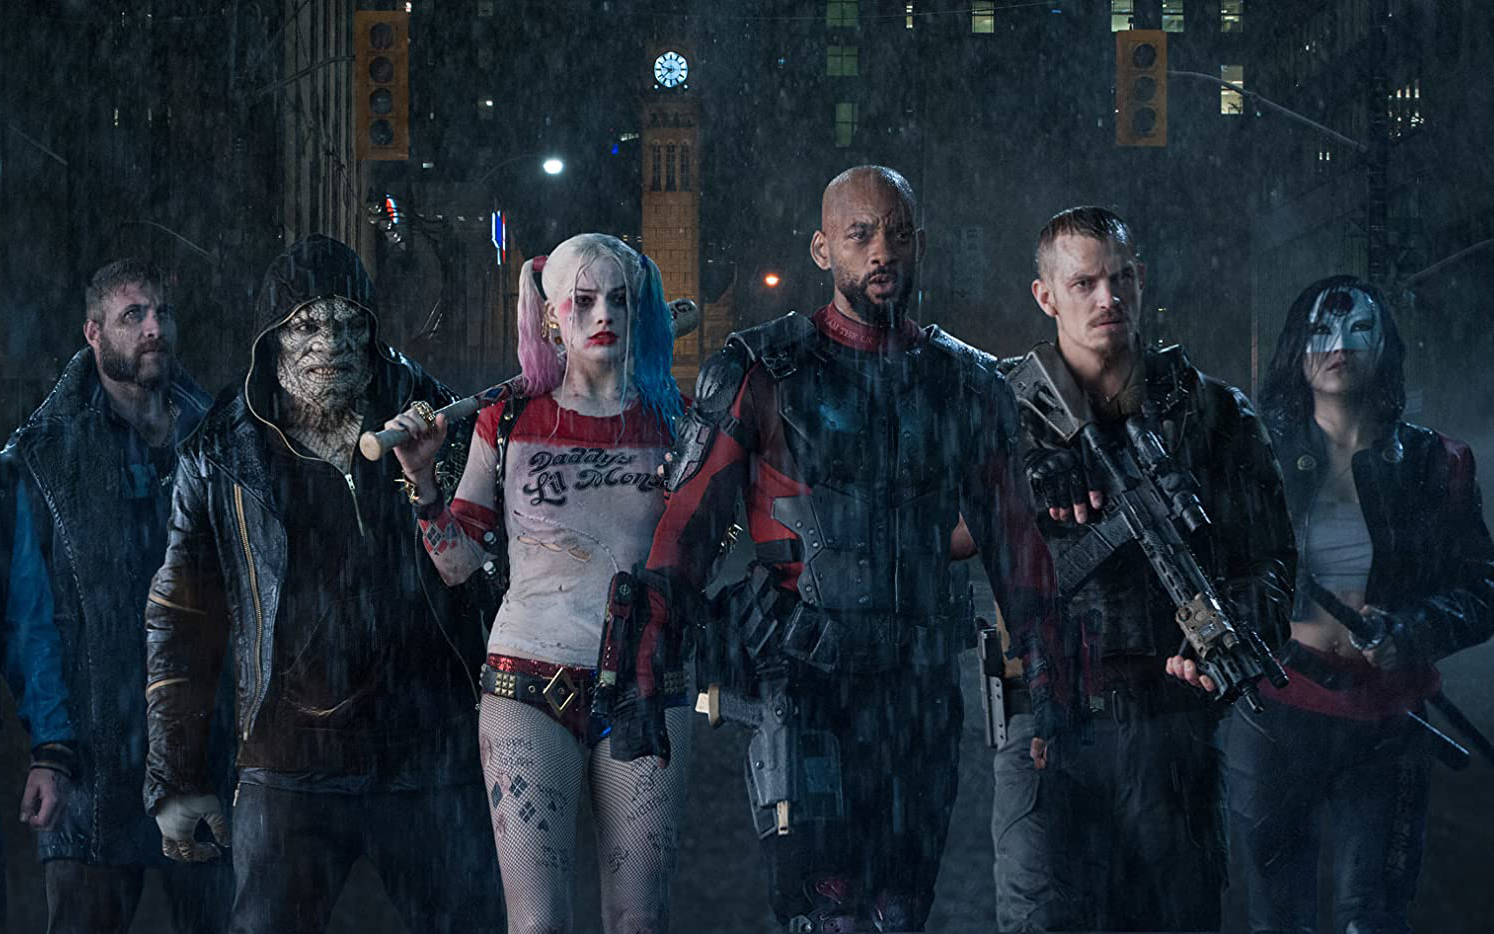 Birds of Prey': Harley Quinn's still fabulous, but vehicle doesn't take her  far or fast enough - Cambridge Day